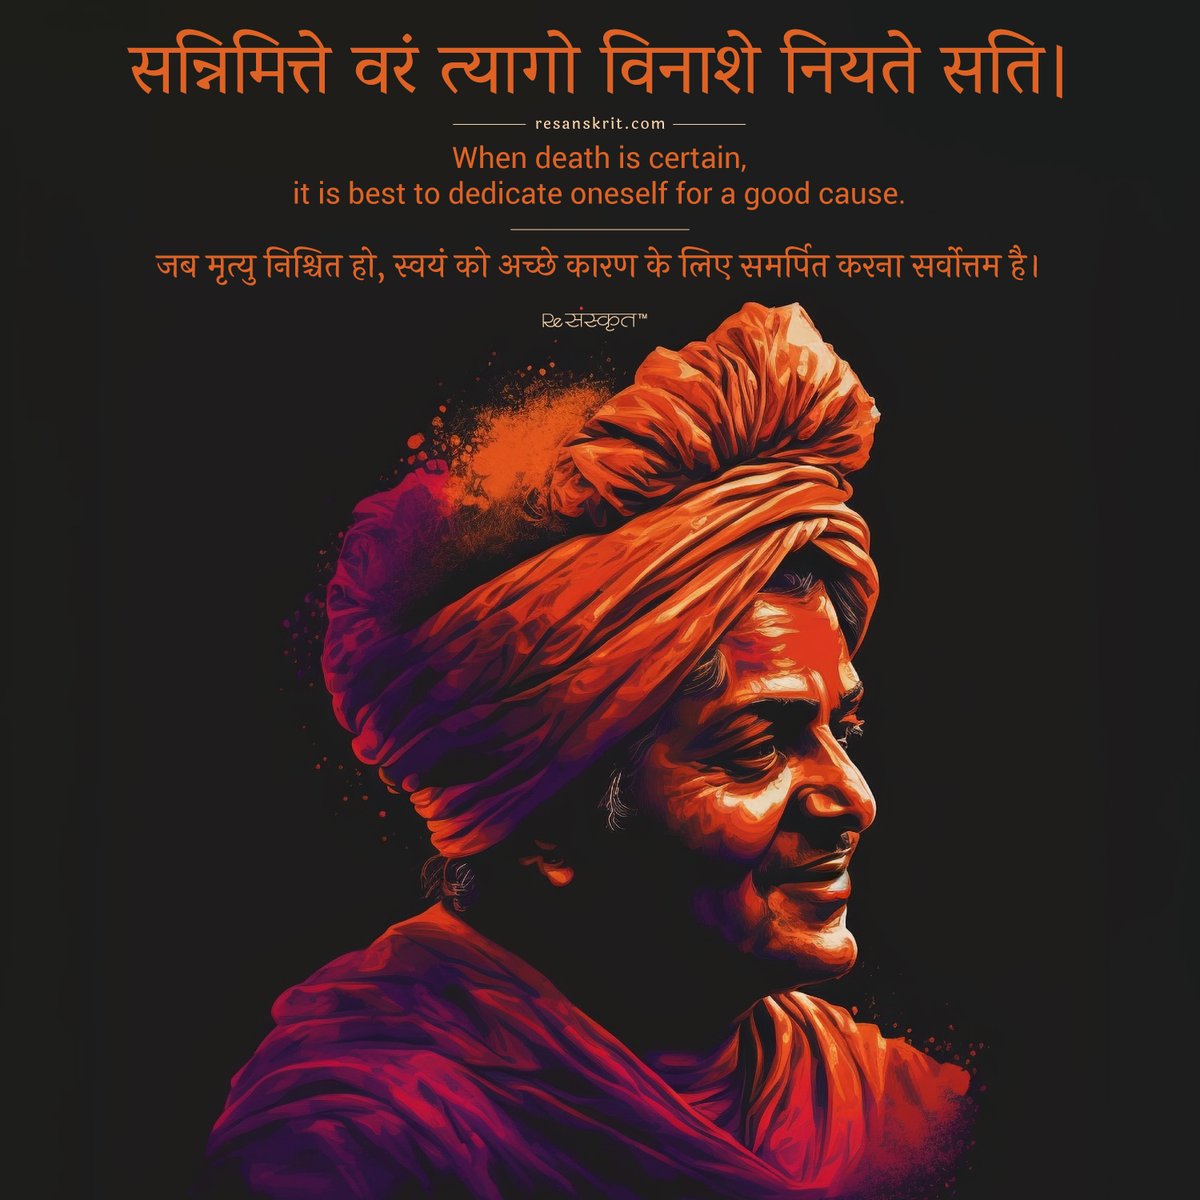 Celebrating National Youth Day (राष्ट्रीय युवा दिवस), 12 January and also the 160th birth anniversary of Swami Vivekananda.

#sanskrit #india #SwamiVivekananda #vivekananda #vivekanand #quotes #nationalyouthday #YuvaDiwas #YuvaDiwas2023 #swamivivekanandaquotes